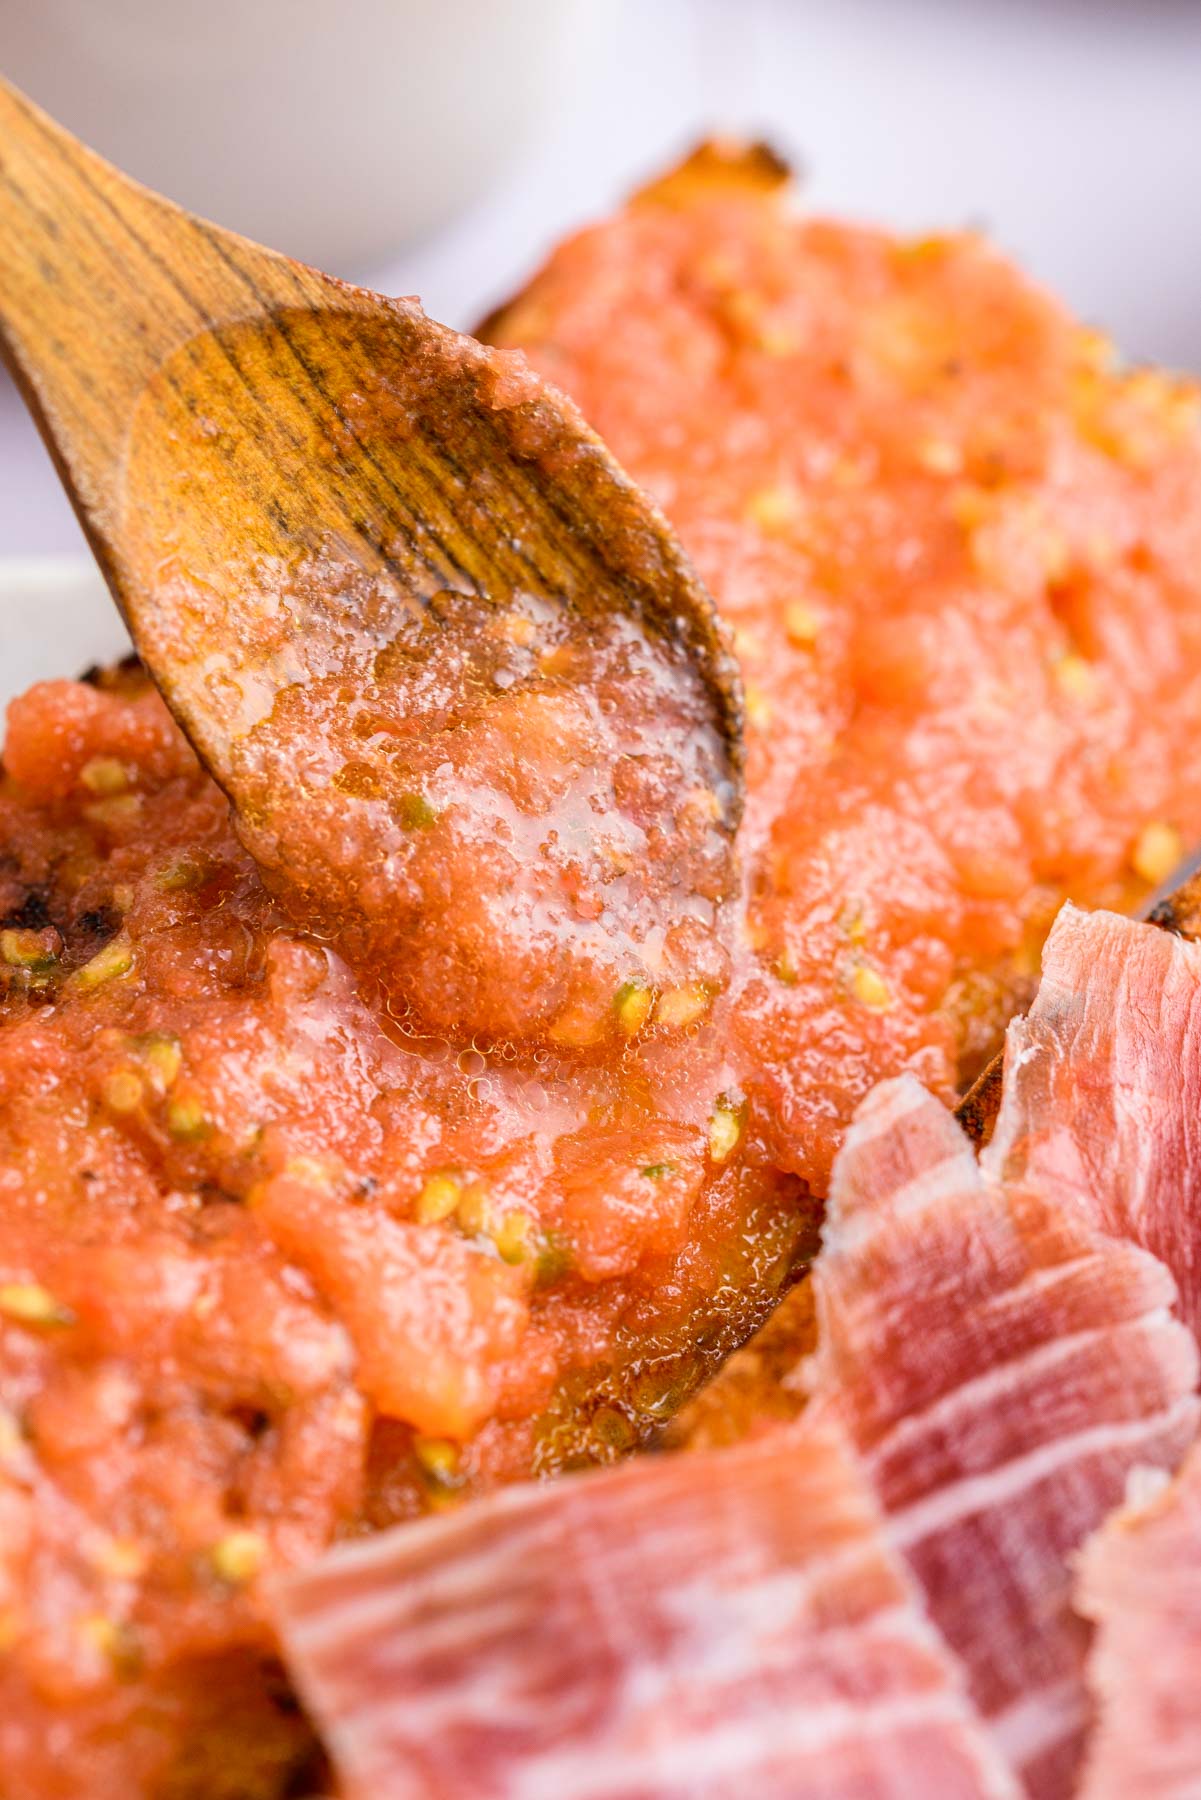 wooden spoon spreading tomato mixture with pieces of ham on bread in front.